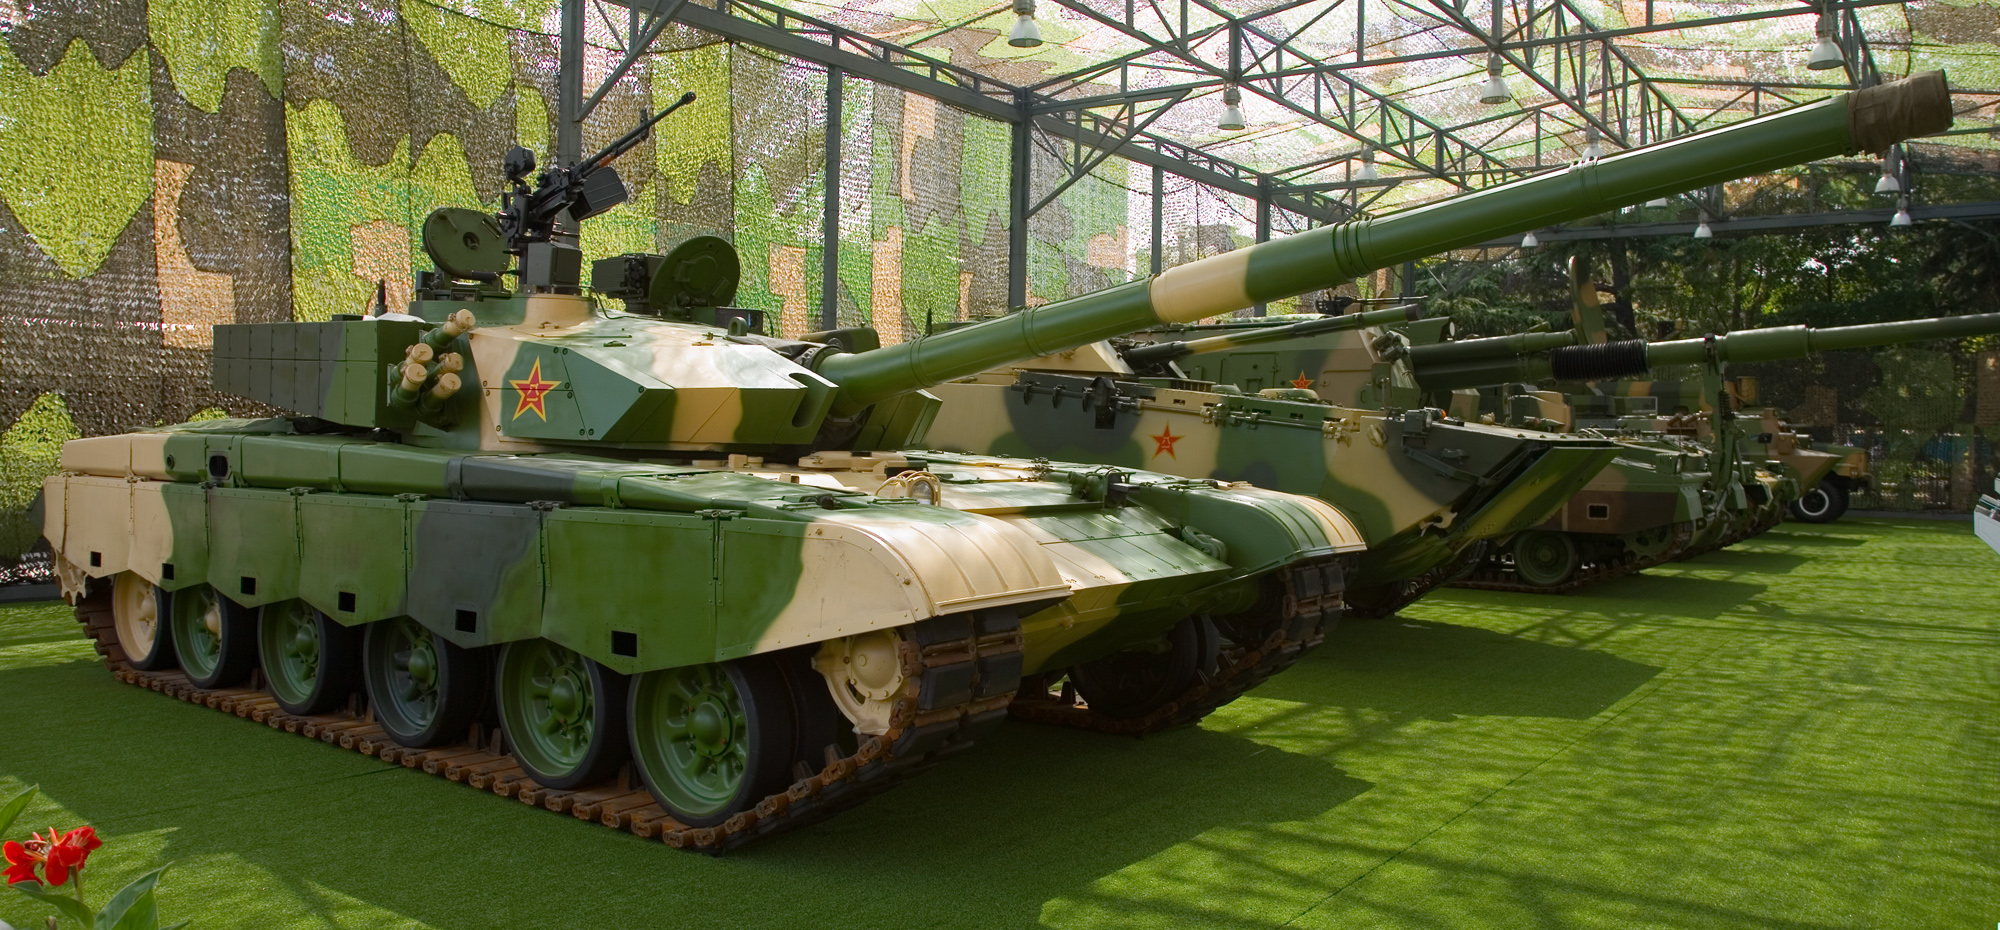 Type 99 on display in China.